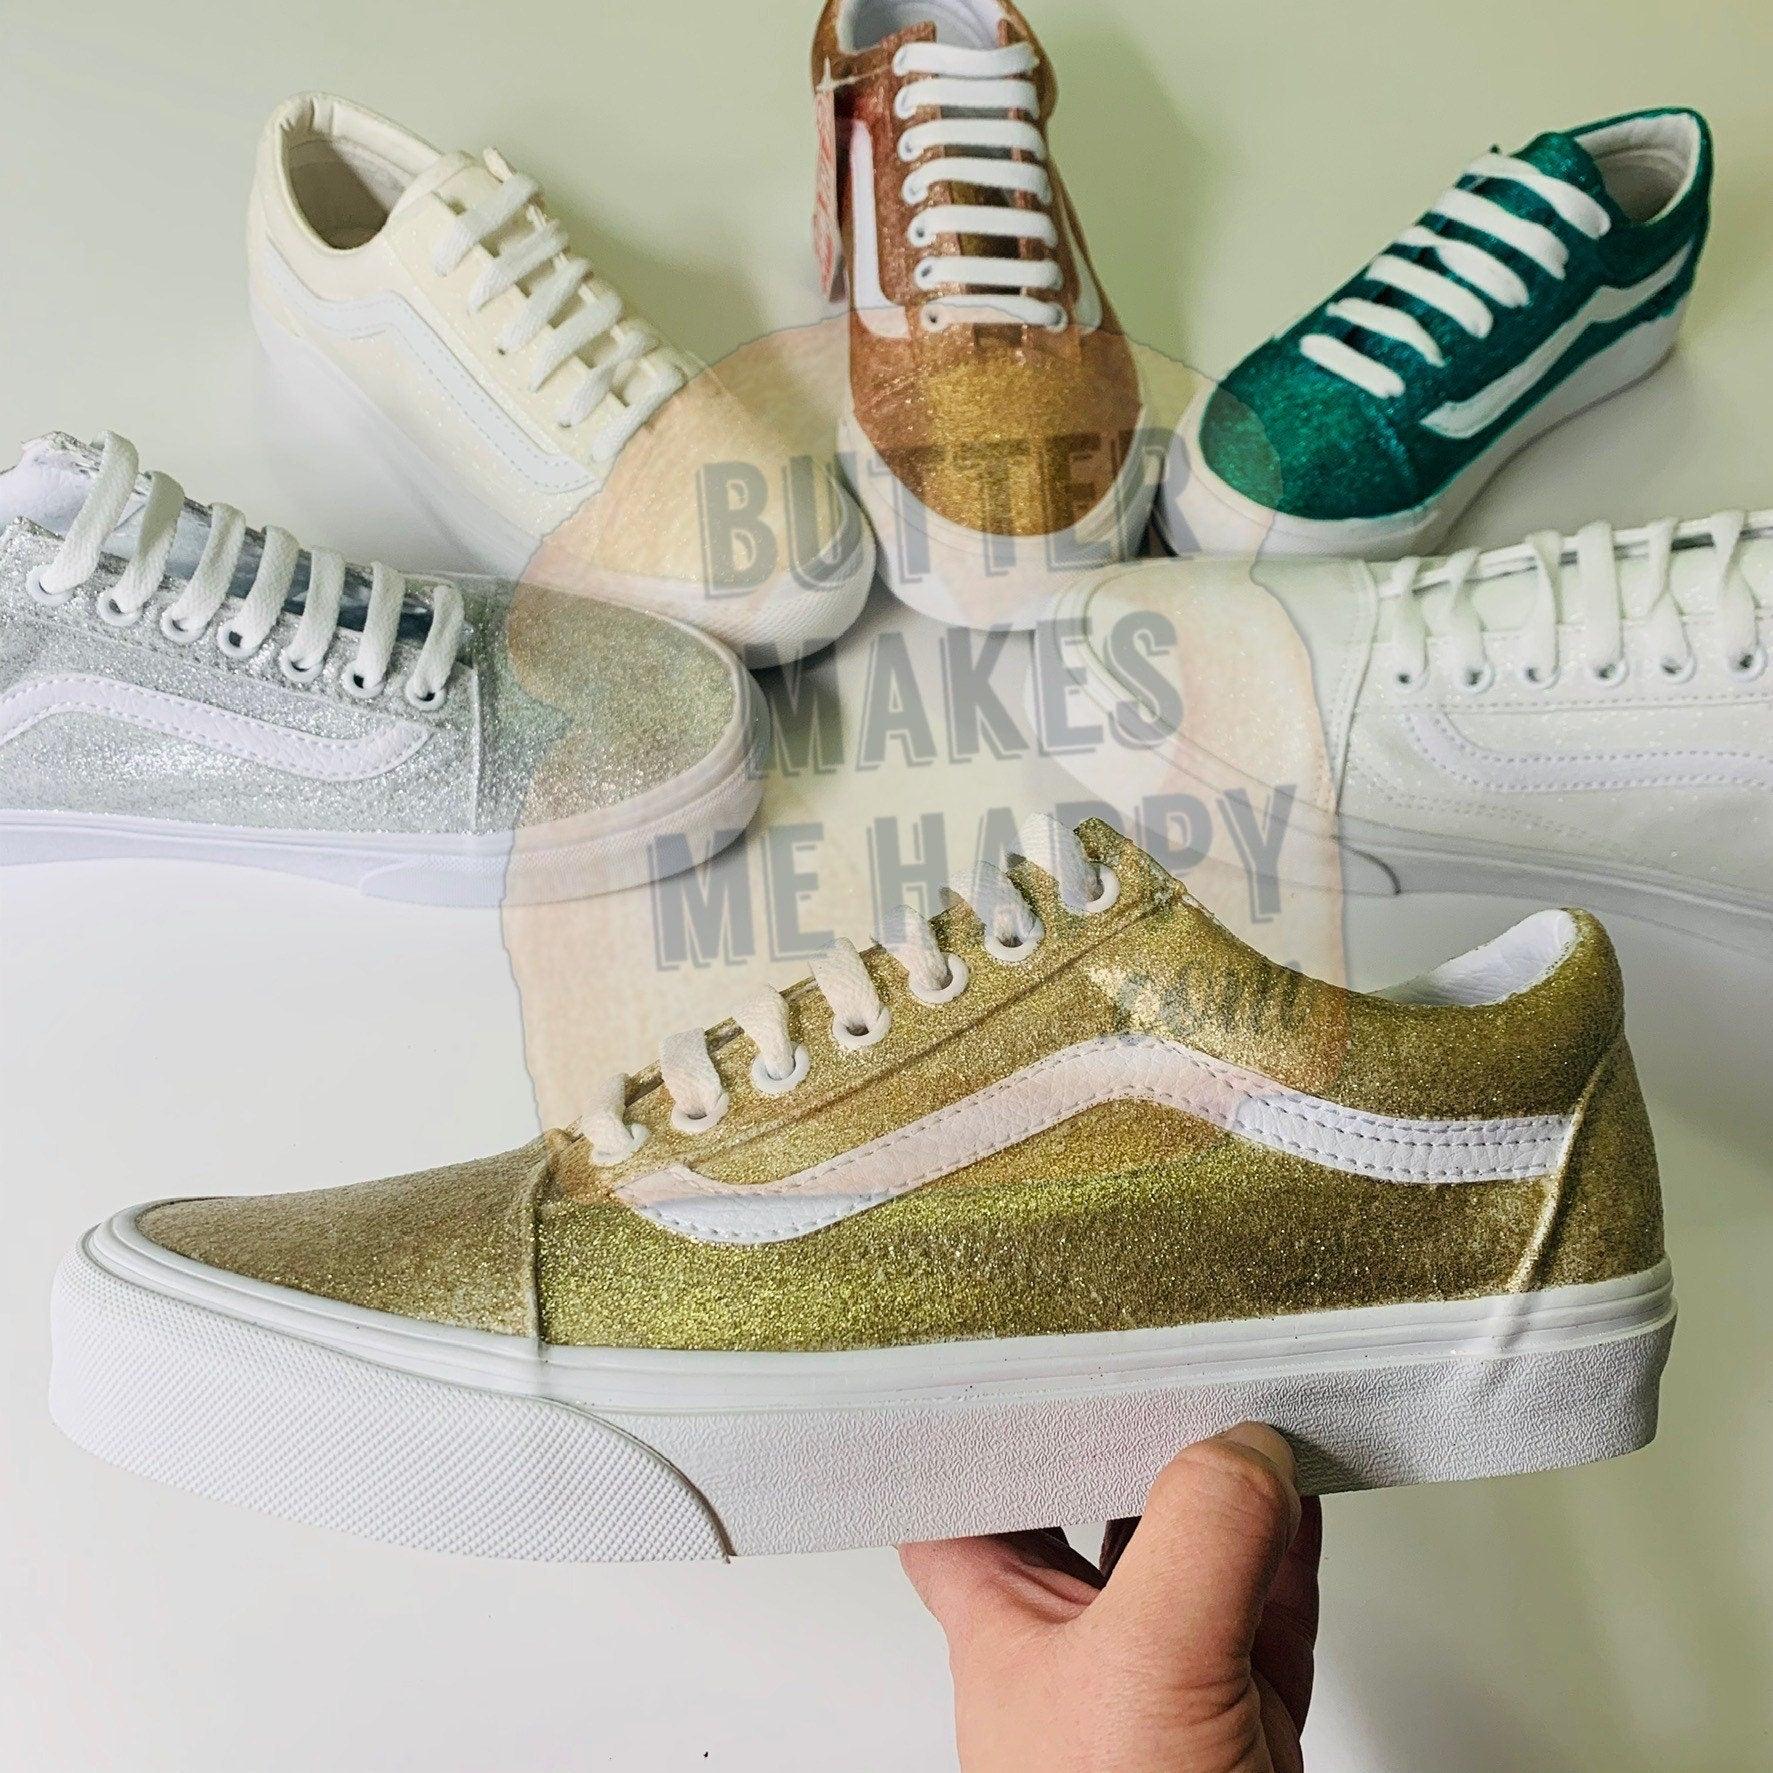 Pick Your Color - Sparkly Glitter Old Skool Vans - ButterMakesMeHappy